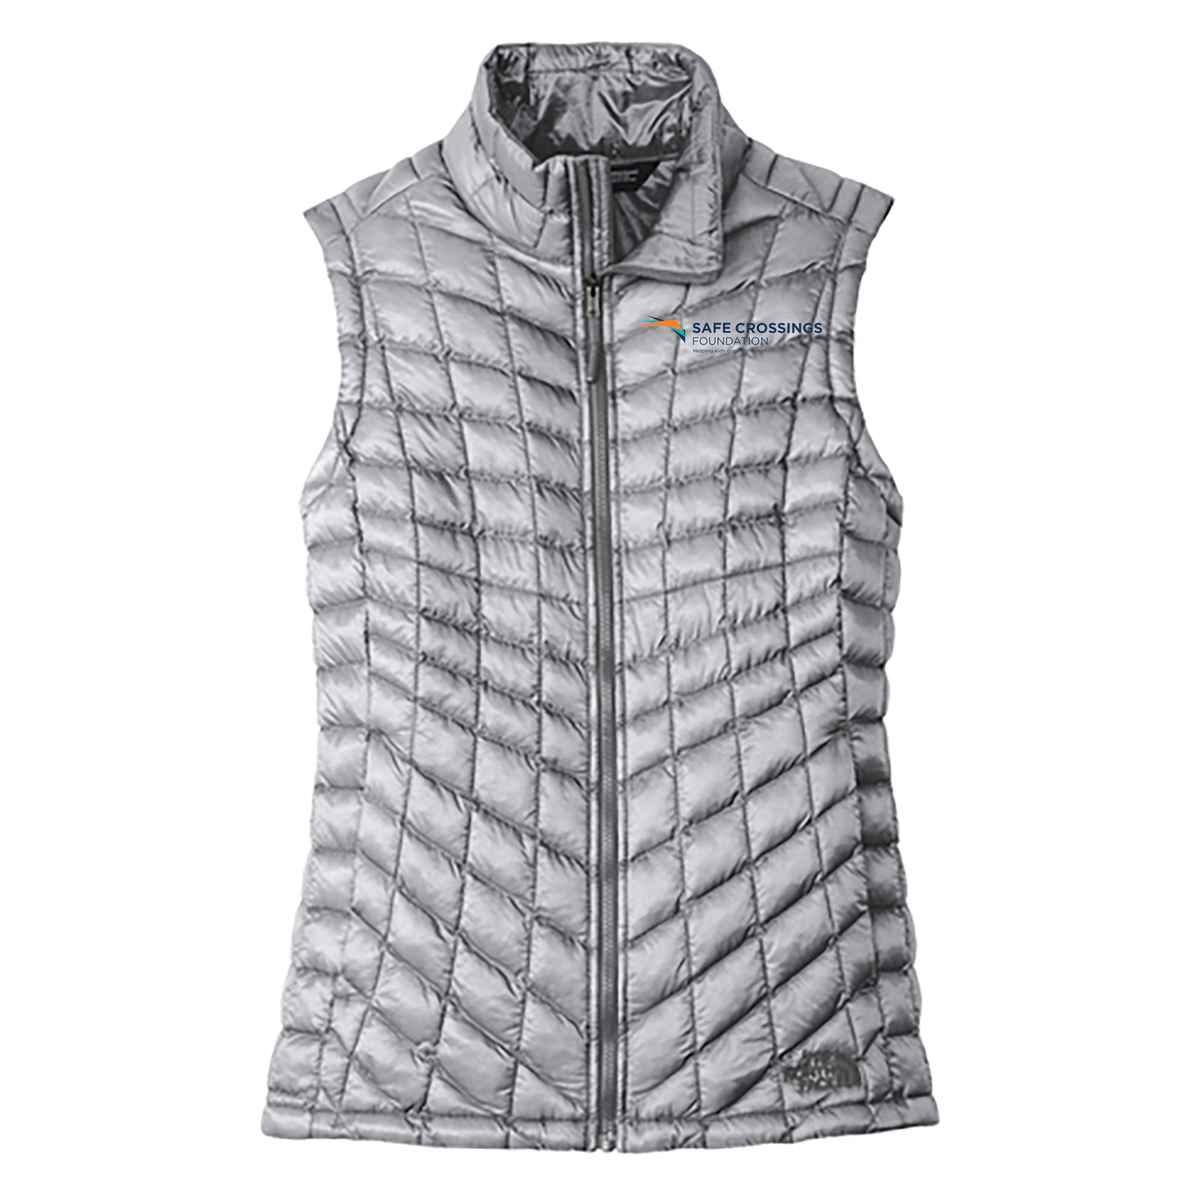 Safe Crossings Foundation The North Face Ladies Thermoball Vest